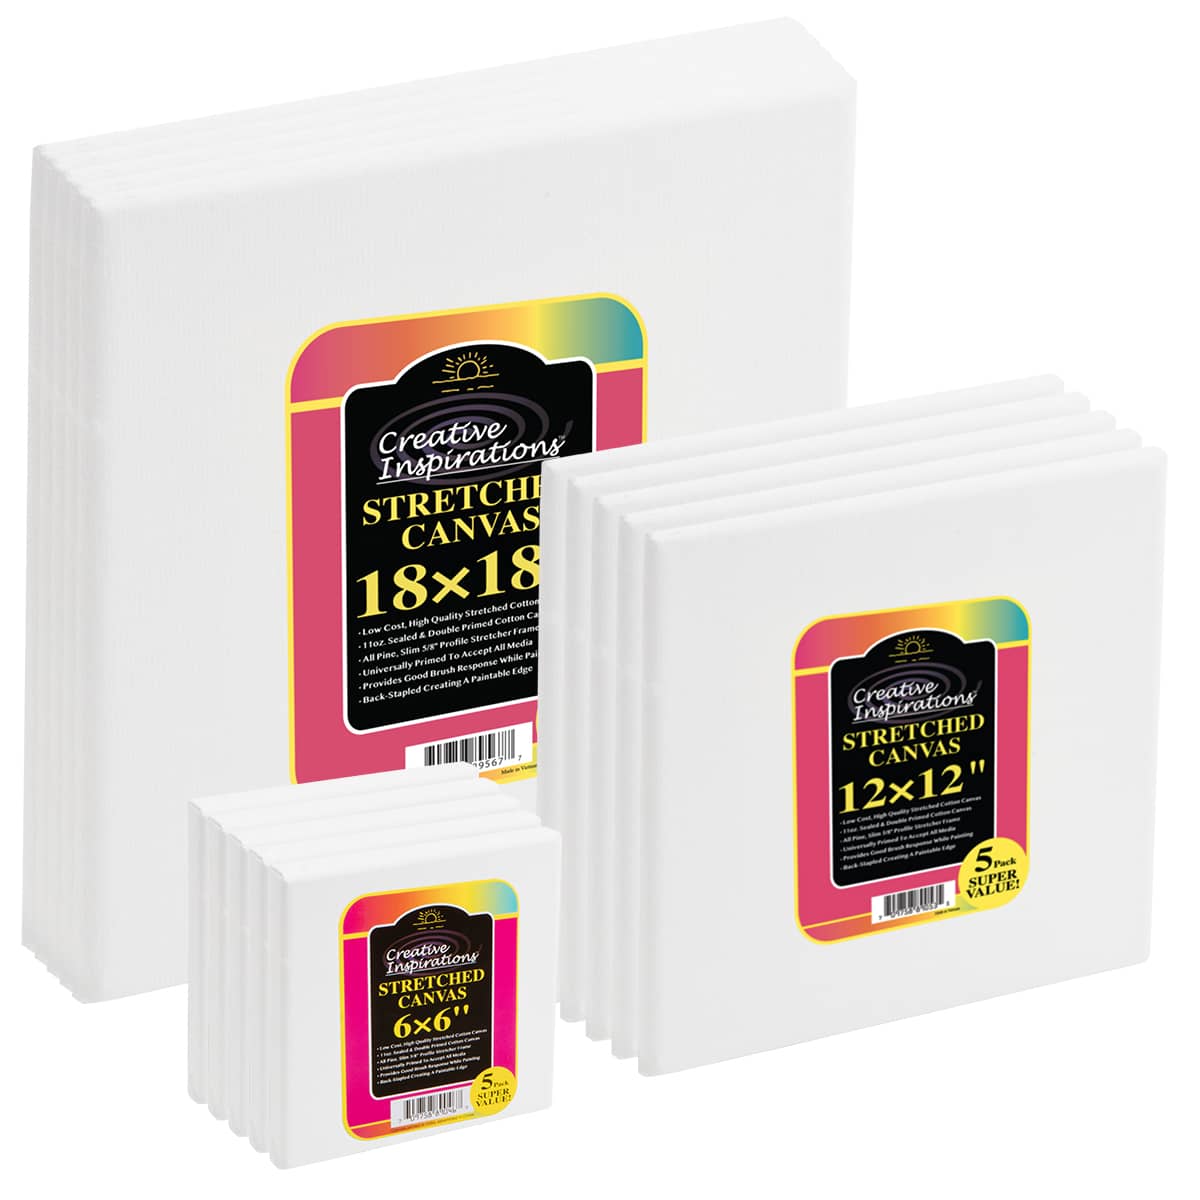 Creative Inspirations Stretch Canvas A Square Deal Set of 15